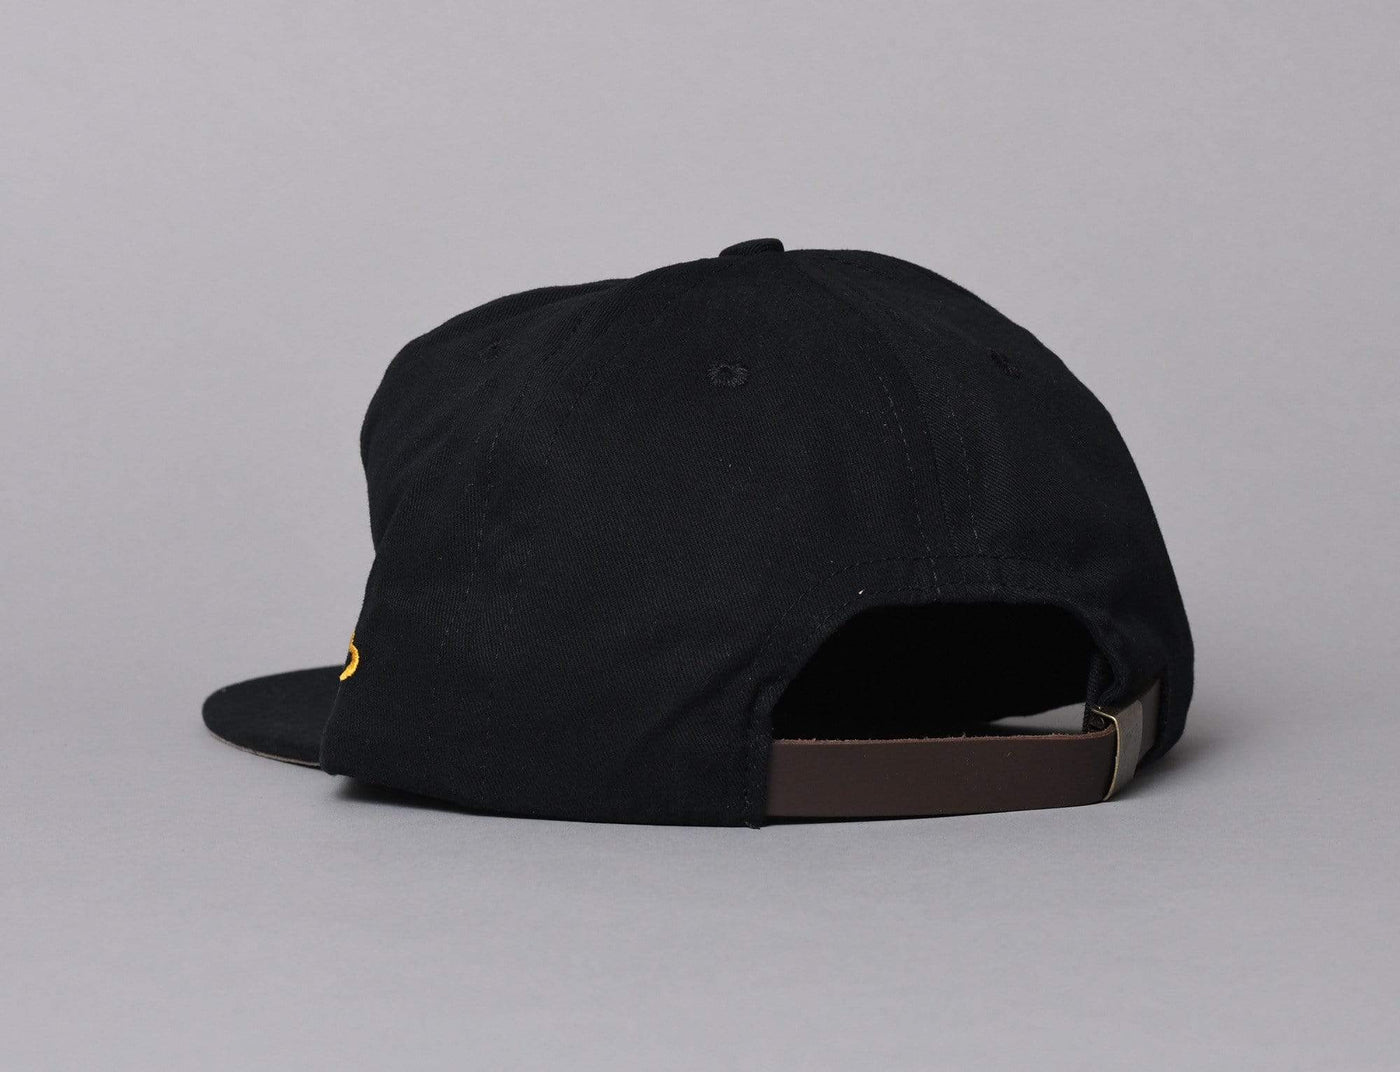 Cap Adjustable The Ampal Creative Grand Canyon Pennant Black The Ampal Creative Adjustable Cap / Black / One Size